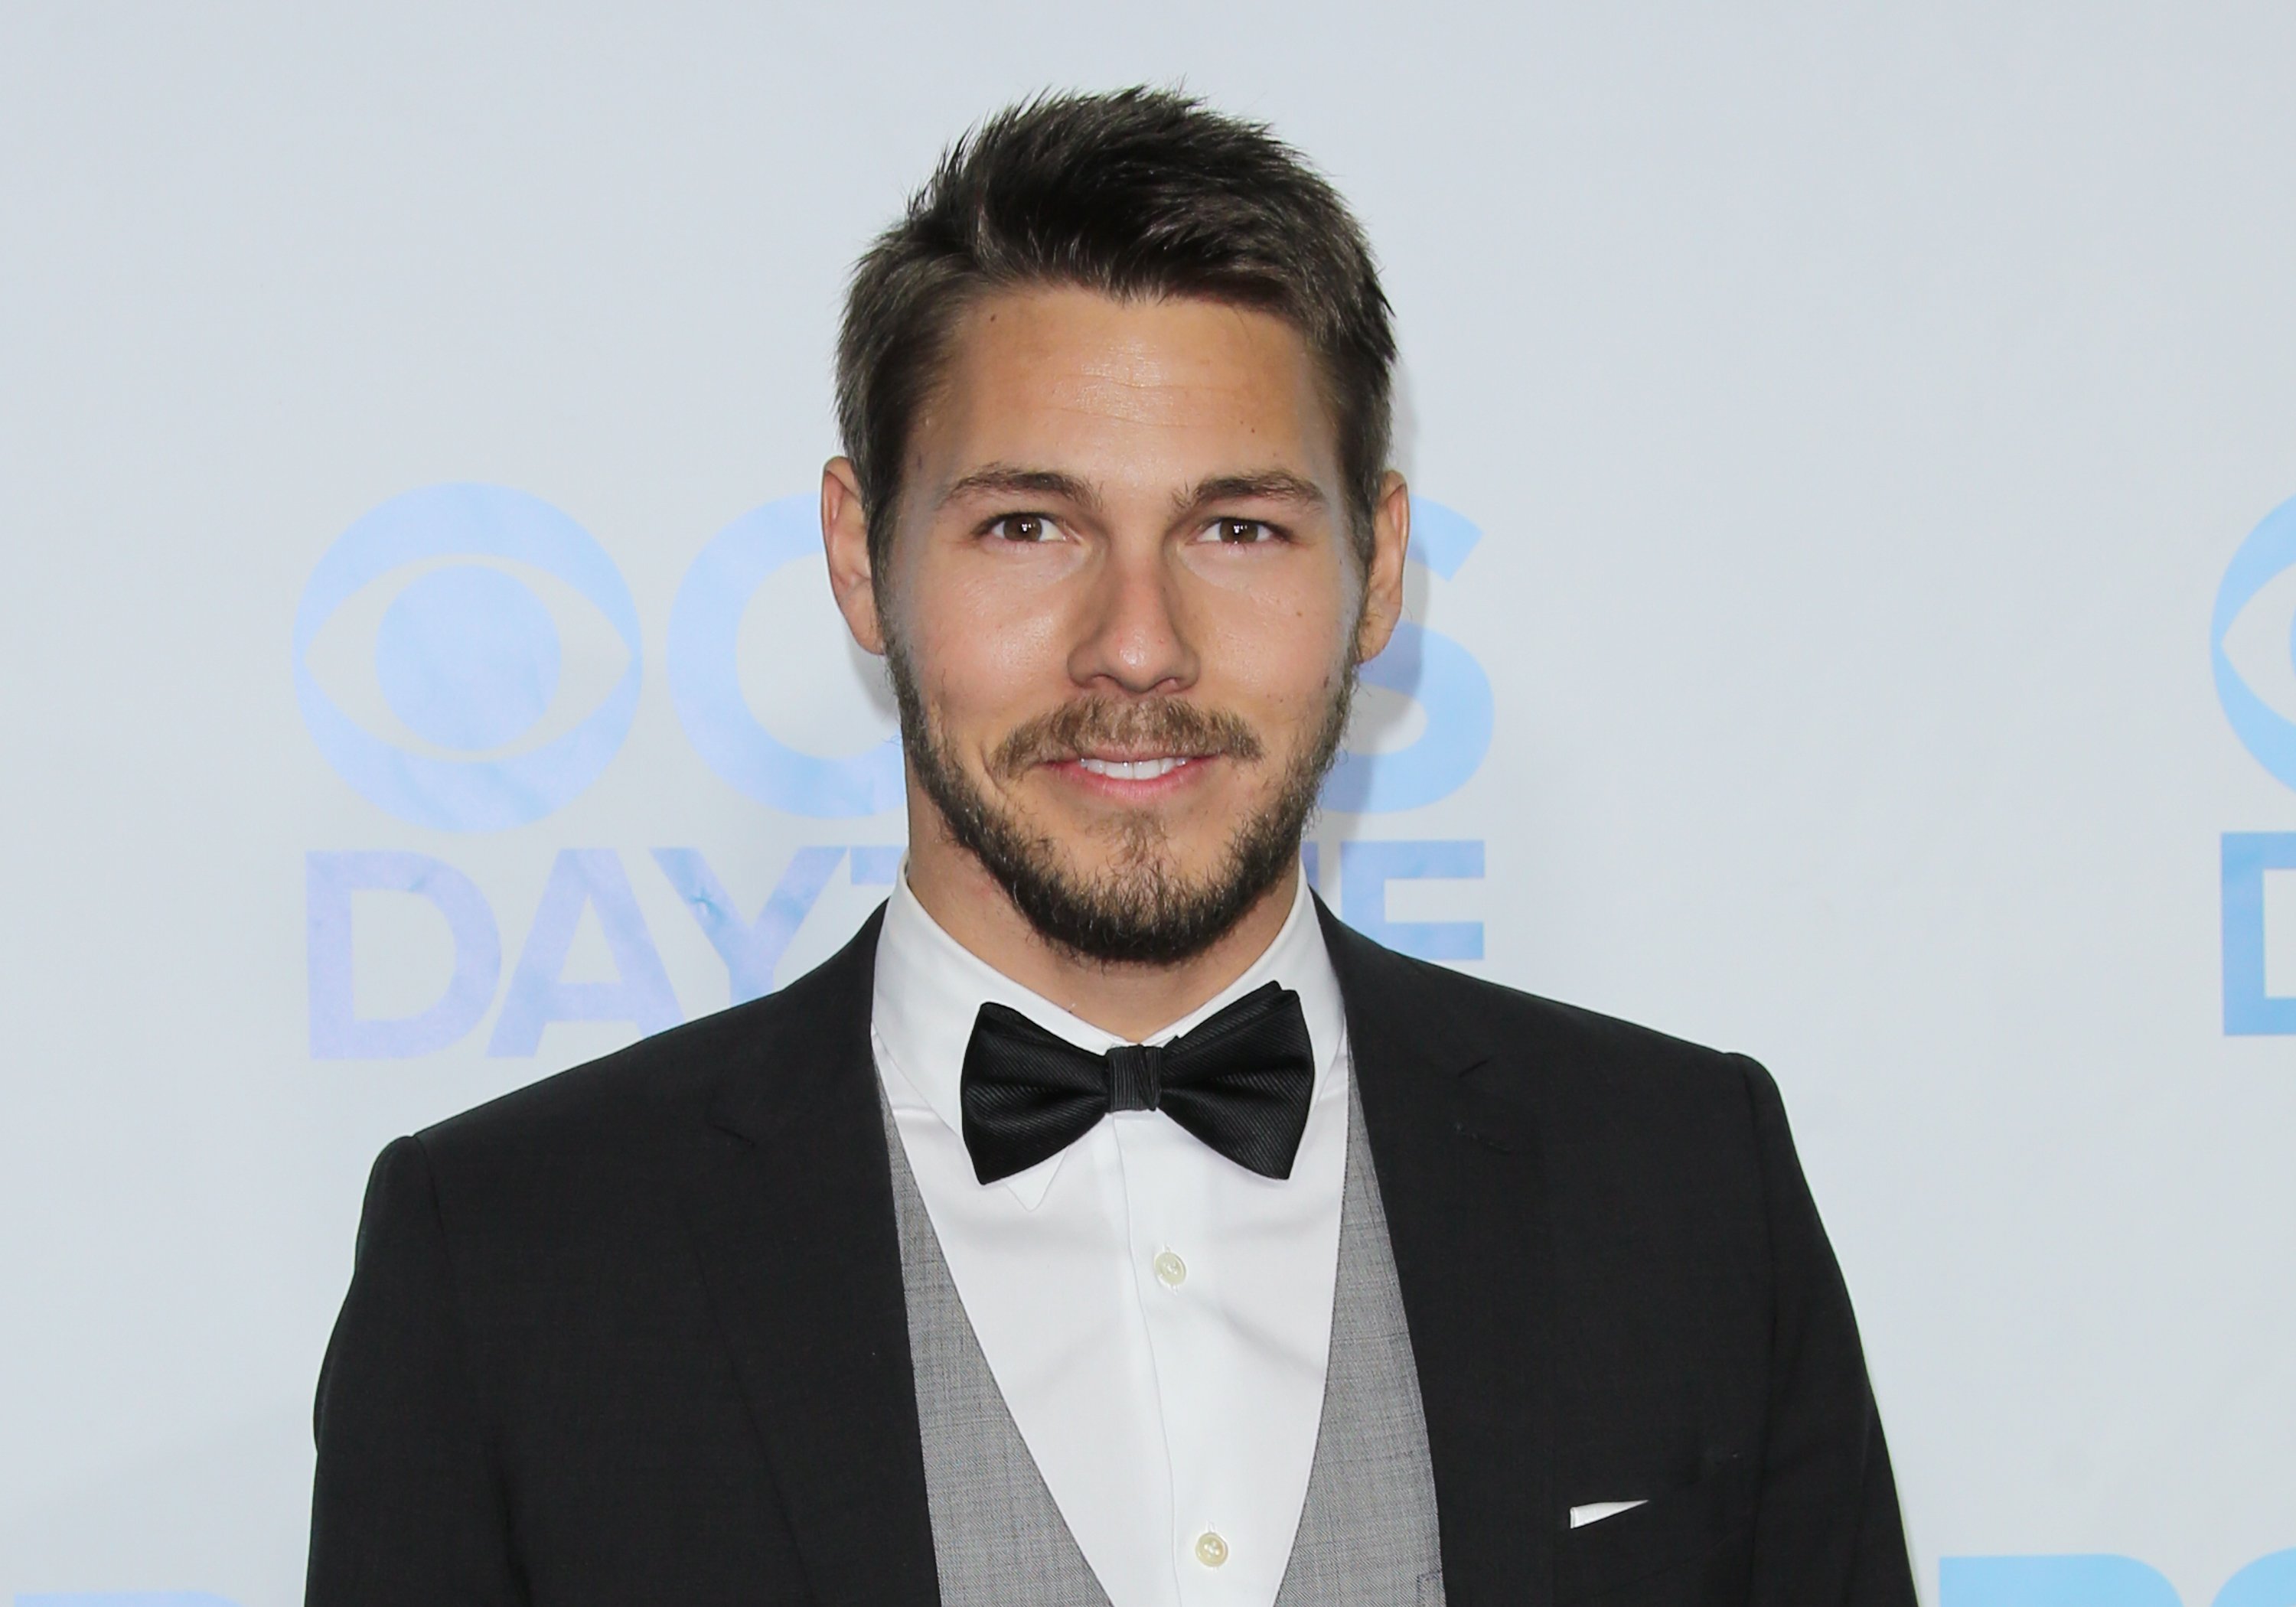 'The Bold and the Beautiful' star Scott Clifton in a tuxedo, smiles for photographers.